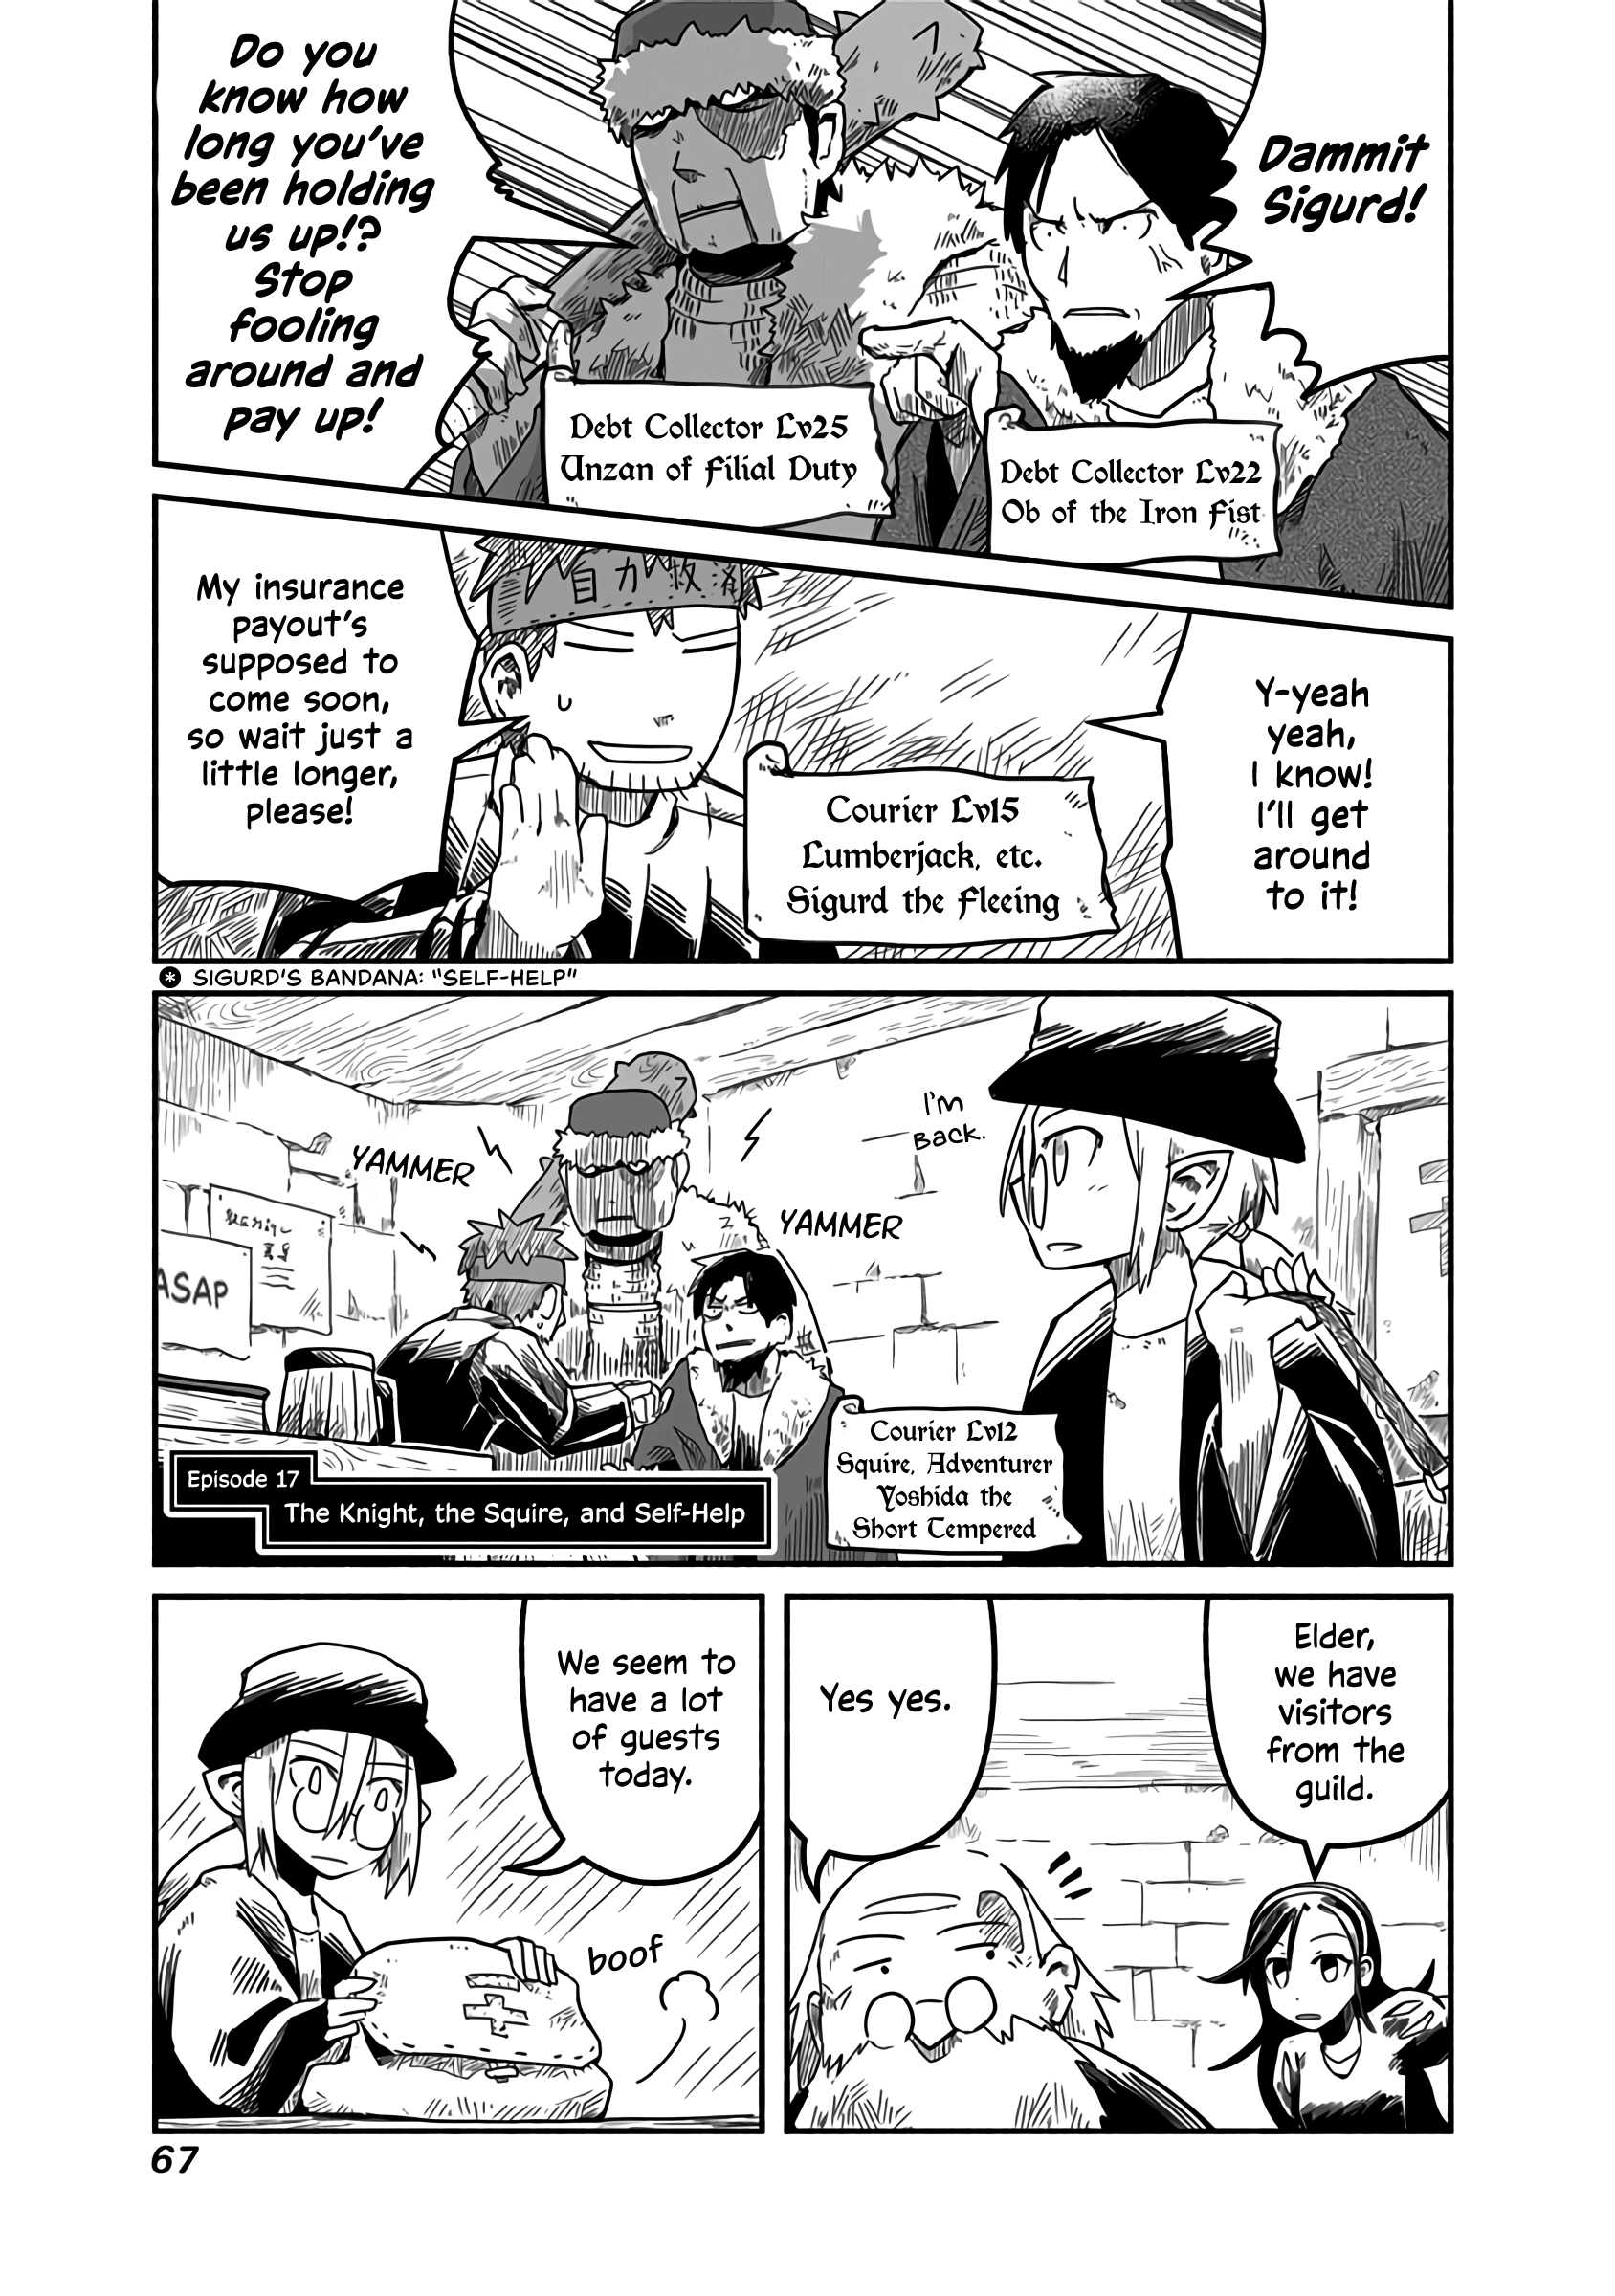 The Dragon, The Hero, And The Courier Vol.3 Chapter 17: The Knight, The Squire, And Self-Help - Picture 2